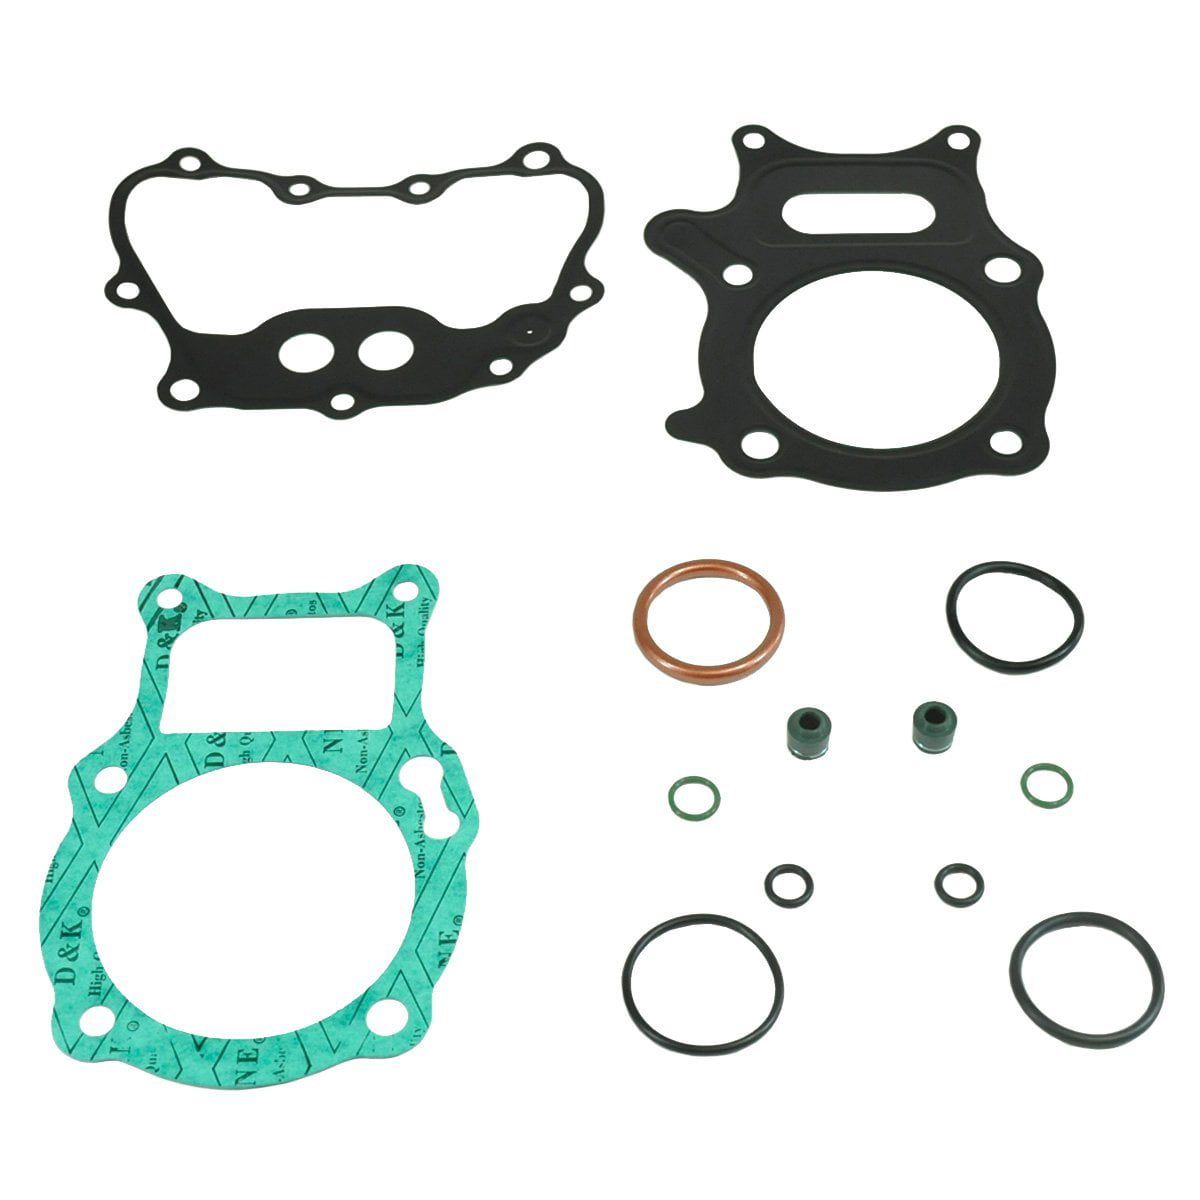 Caltric Exhaust Pipe Gasket Compatible With Honda Trx250 Recon 250 2X4 1997 1998 1999 2000 2001 